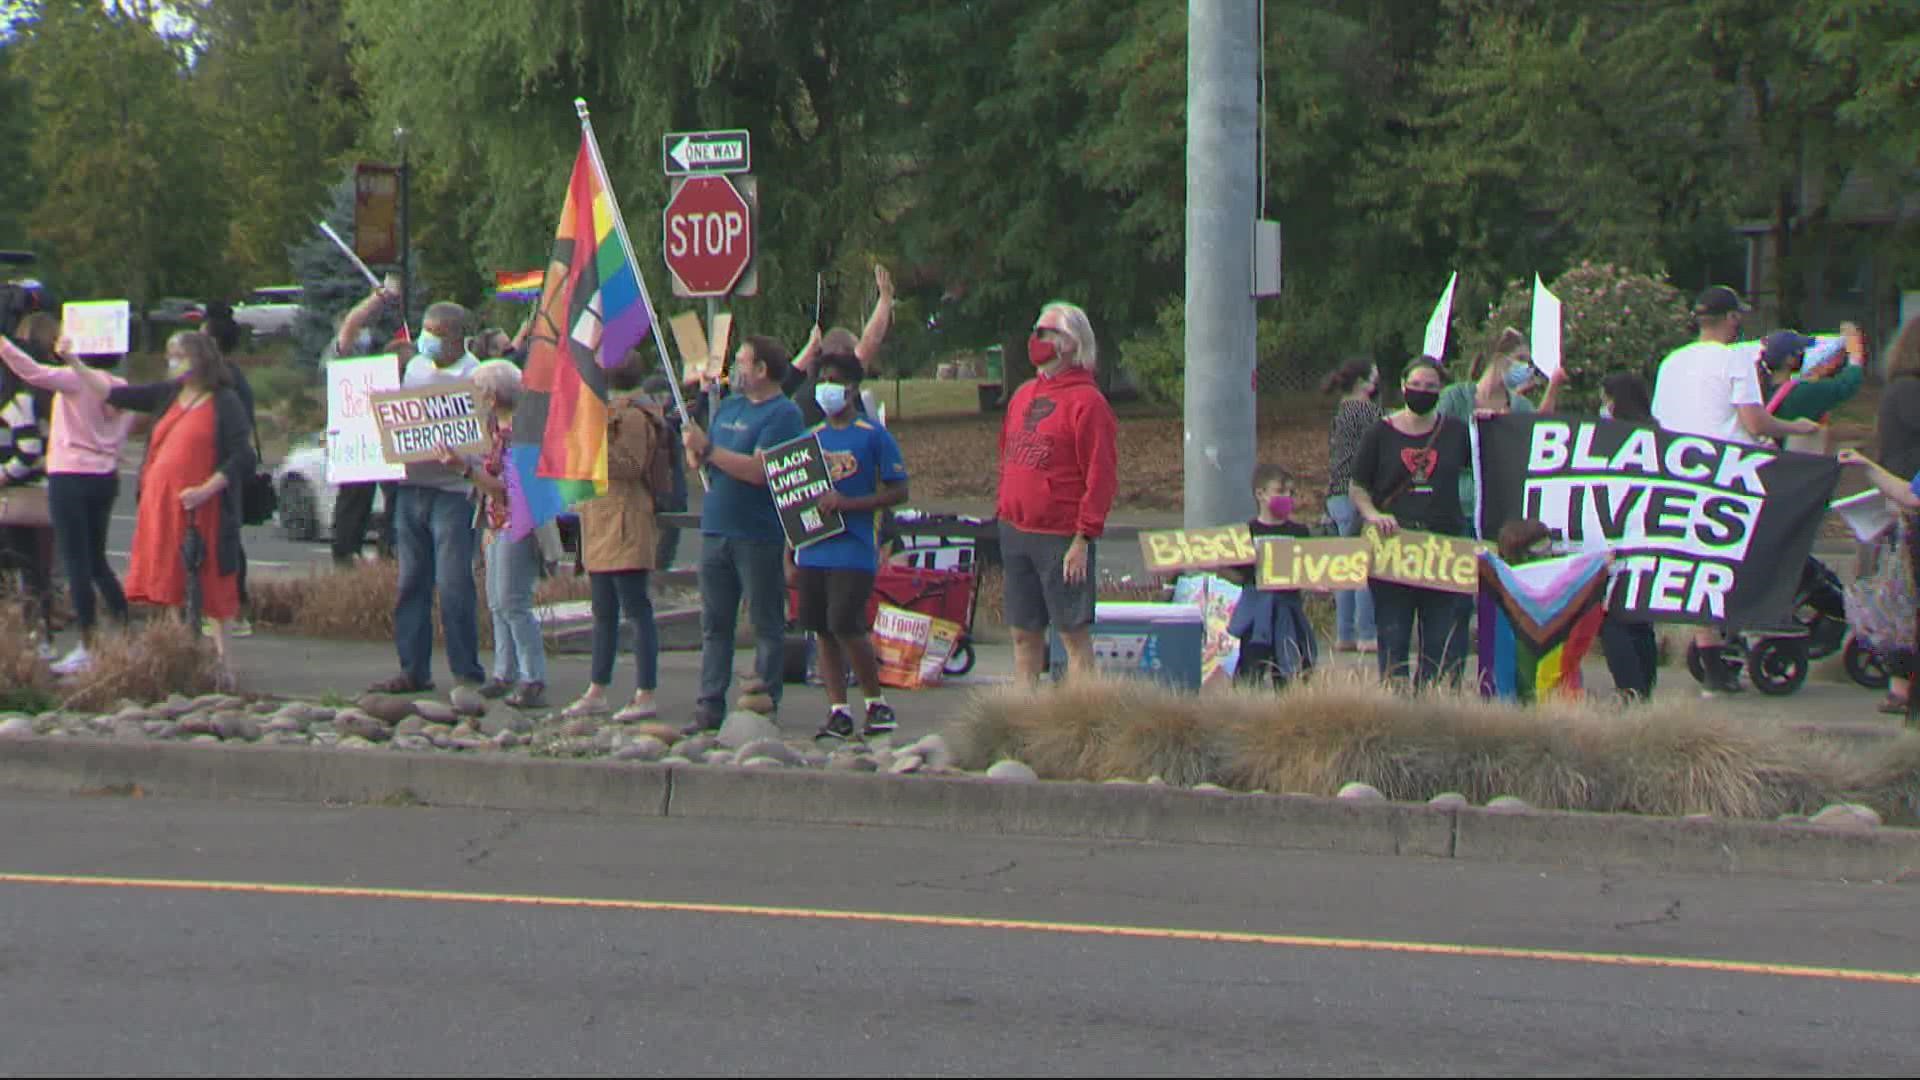 Dozens descended on the intersection of Highway 99 and South River Street in Newberg on Sept. 22 to rally against hate.